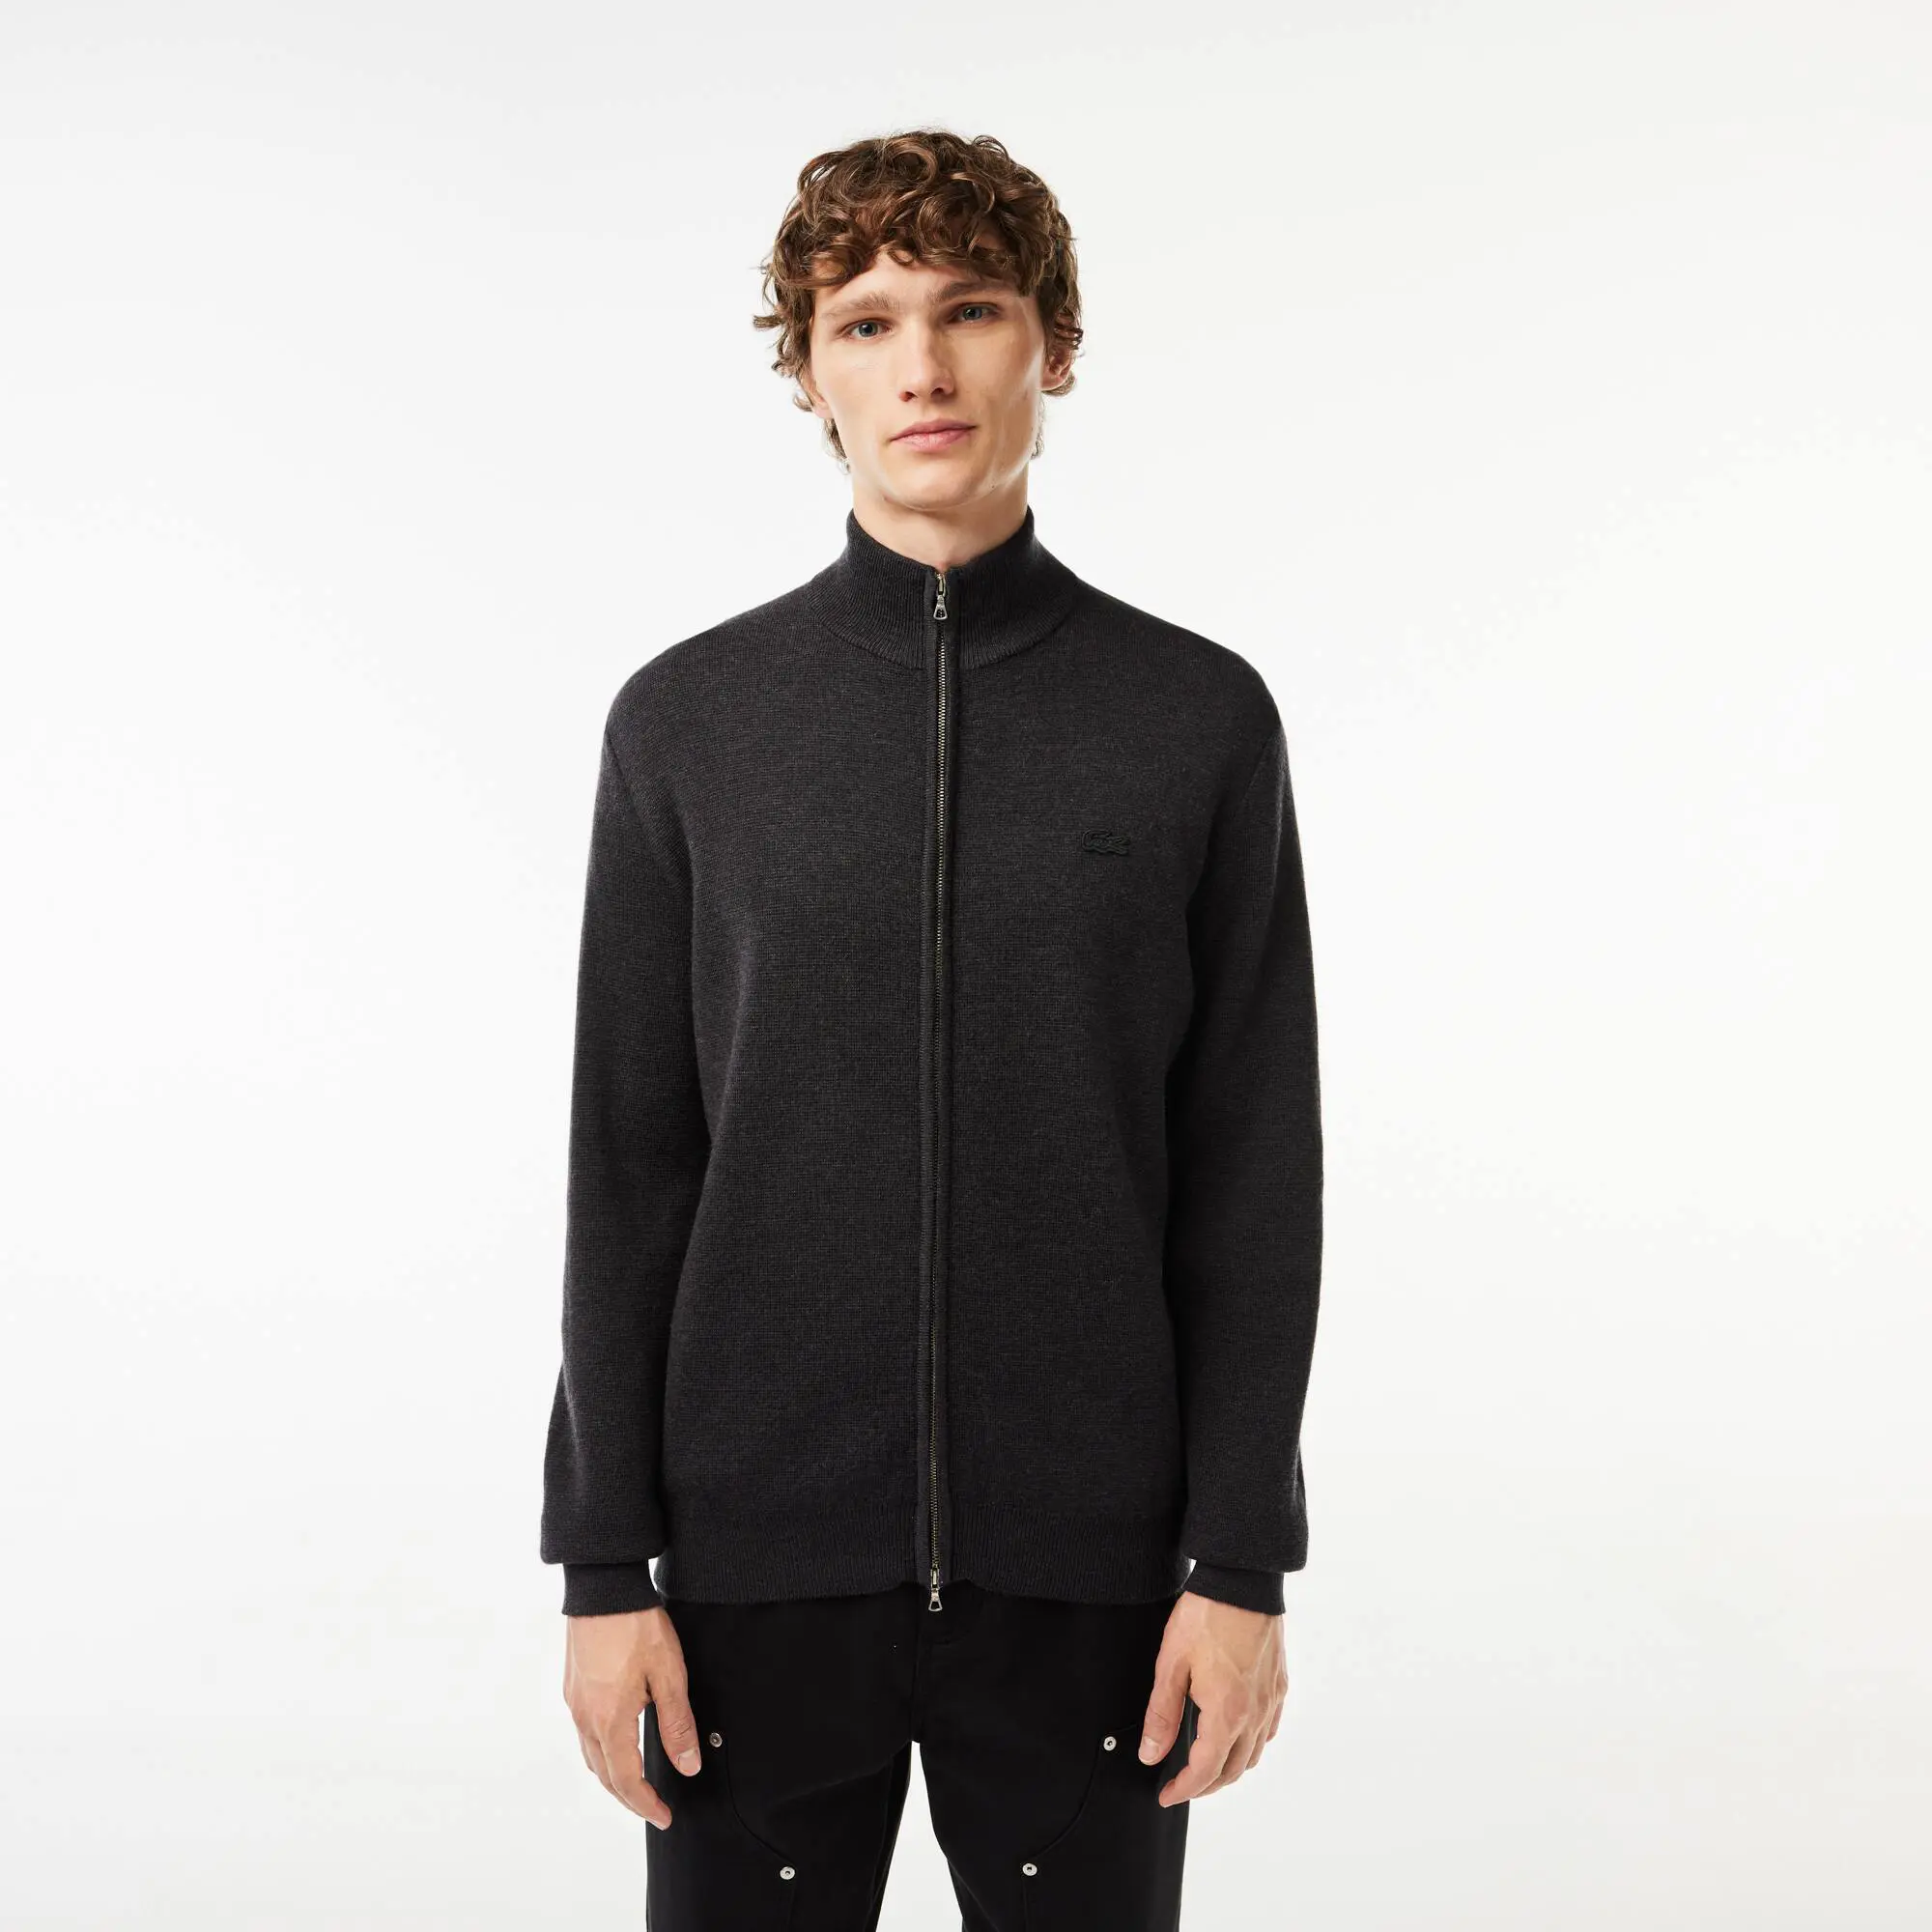 Lacoste Men's Zippered Stand-Up Neck Wool Cardigan. 1